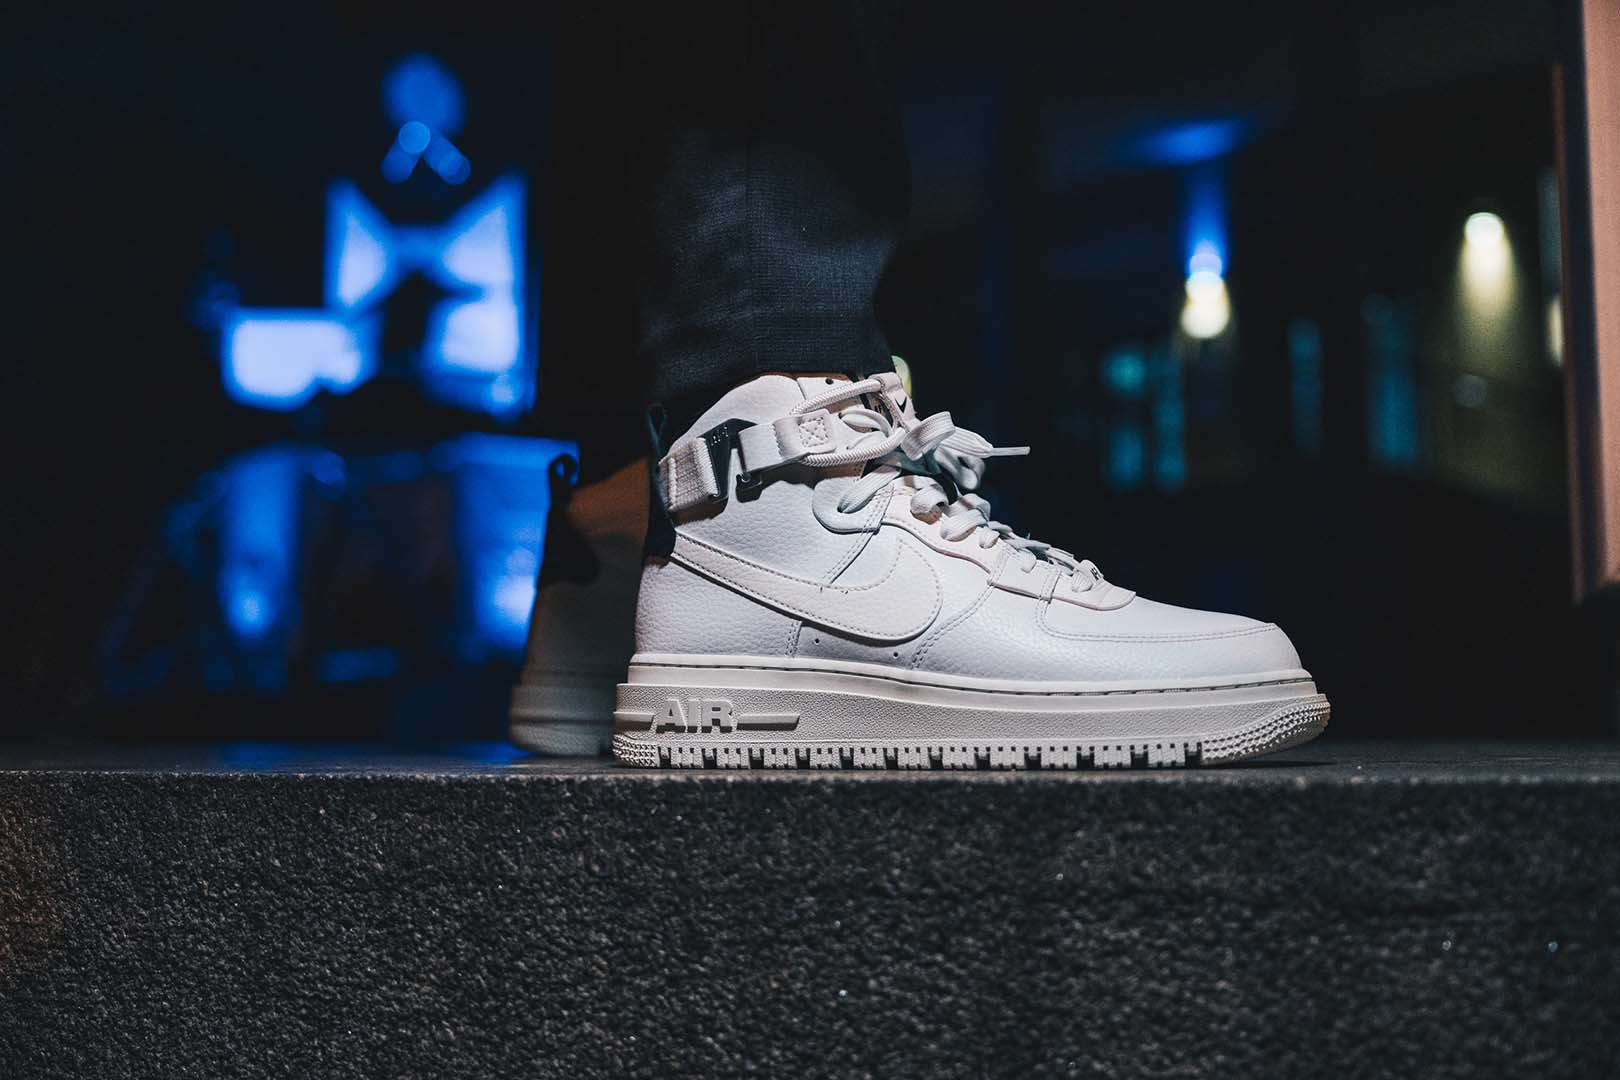 Women's shoes Nike W Air Force 1 High Utility 2.0 Summit White